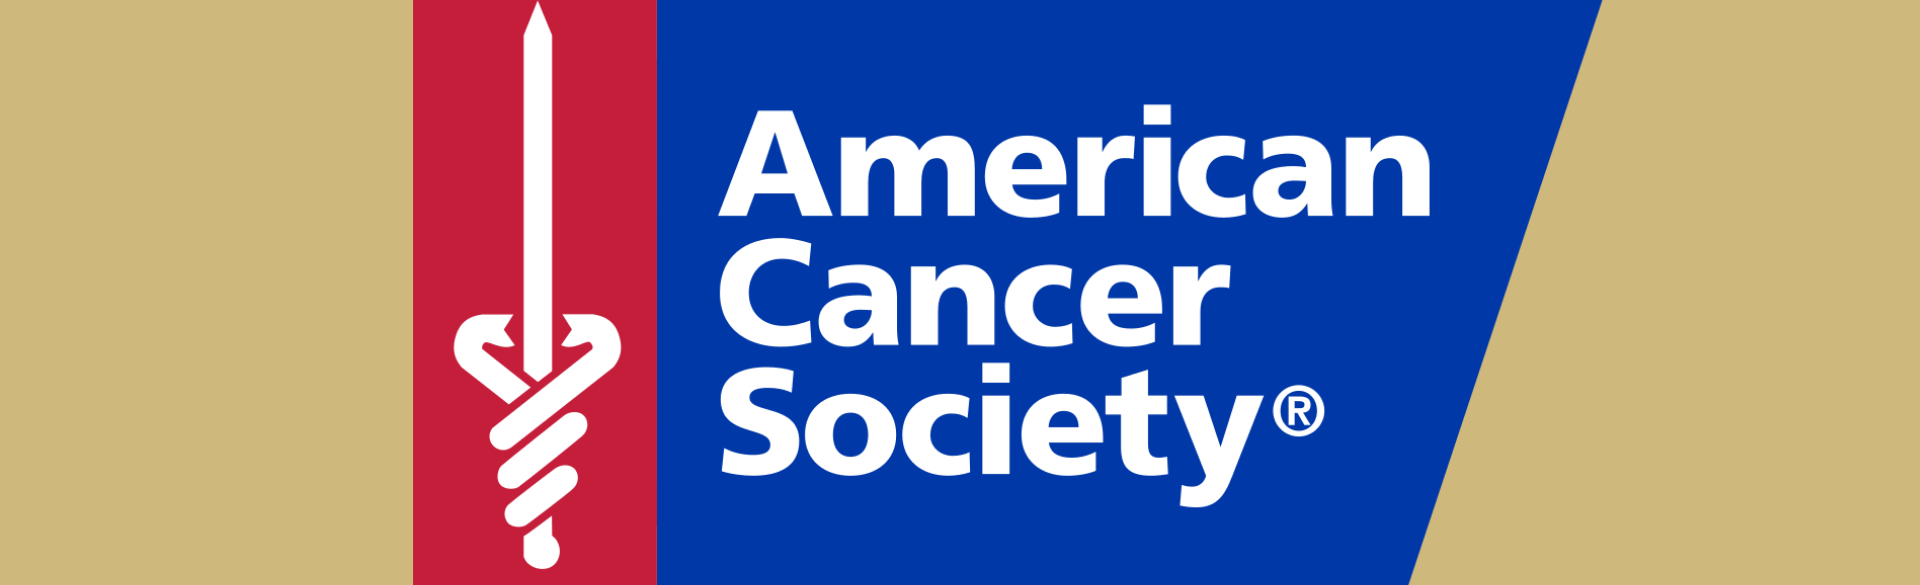 The American Cancer Society's annual cancer statistics report that the risk of dying from cancer in the U.S. has fallen 32% over the past 28 years. 